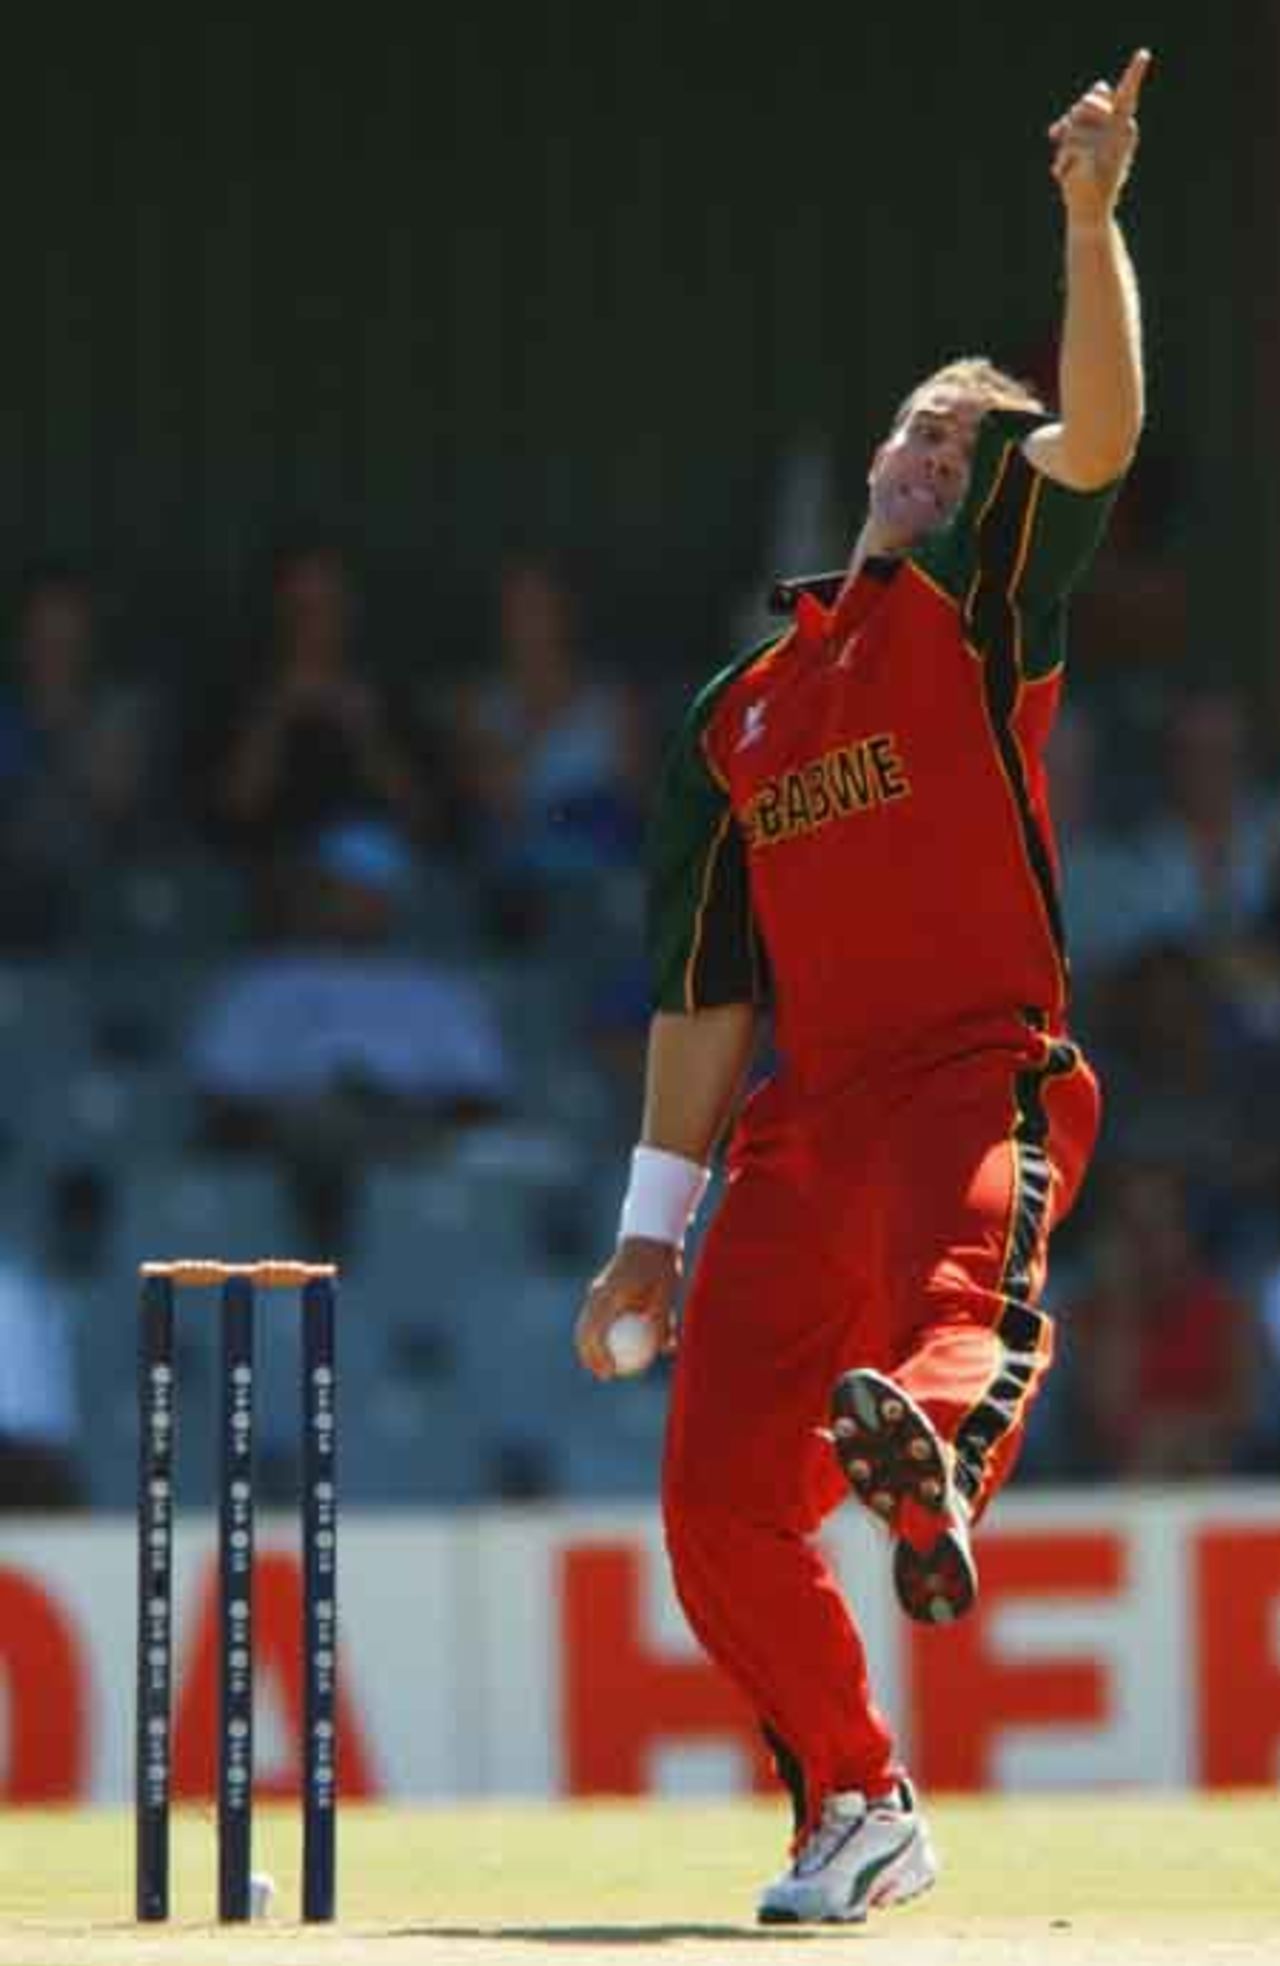 Heath Streak of Zimbabwe bowls during the ICC Cricket World Cup Super Six match between Sri Lanka and Zimbabwe held on March 15, 2003 at Buffalo Park in East London, South Africa.